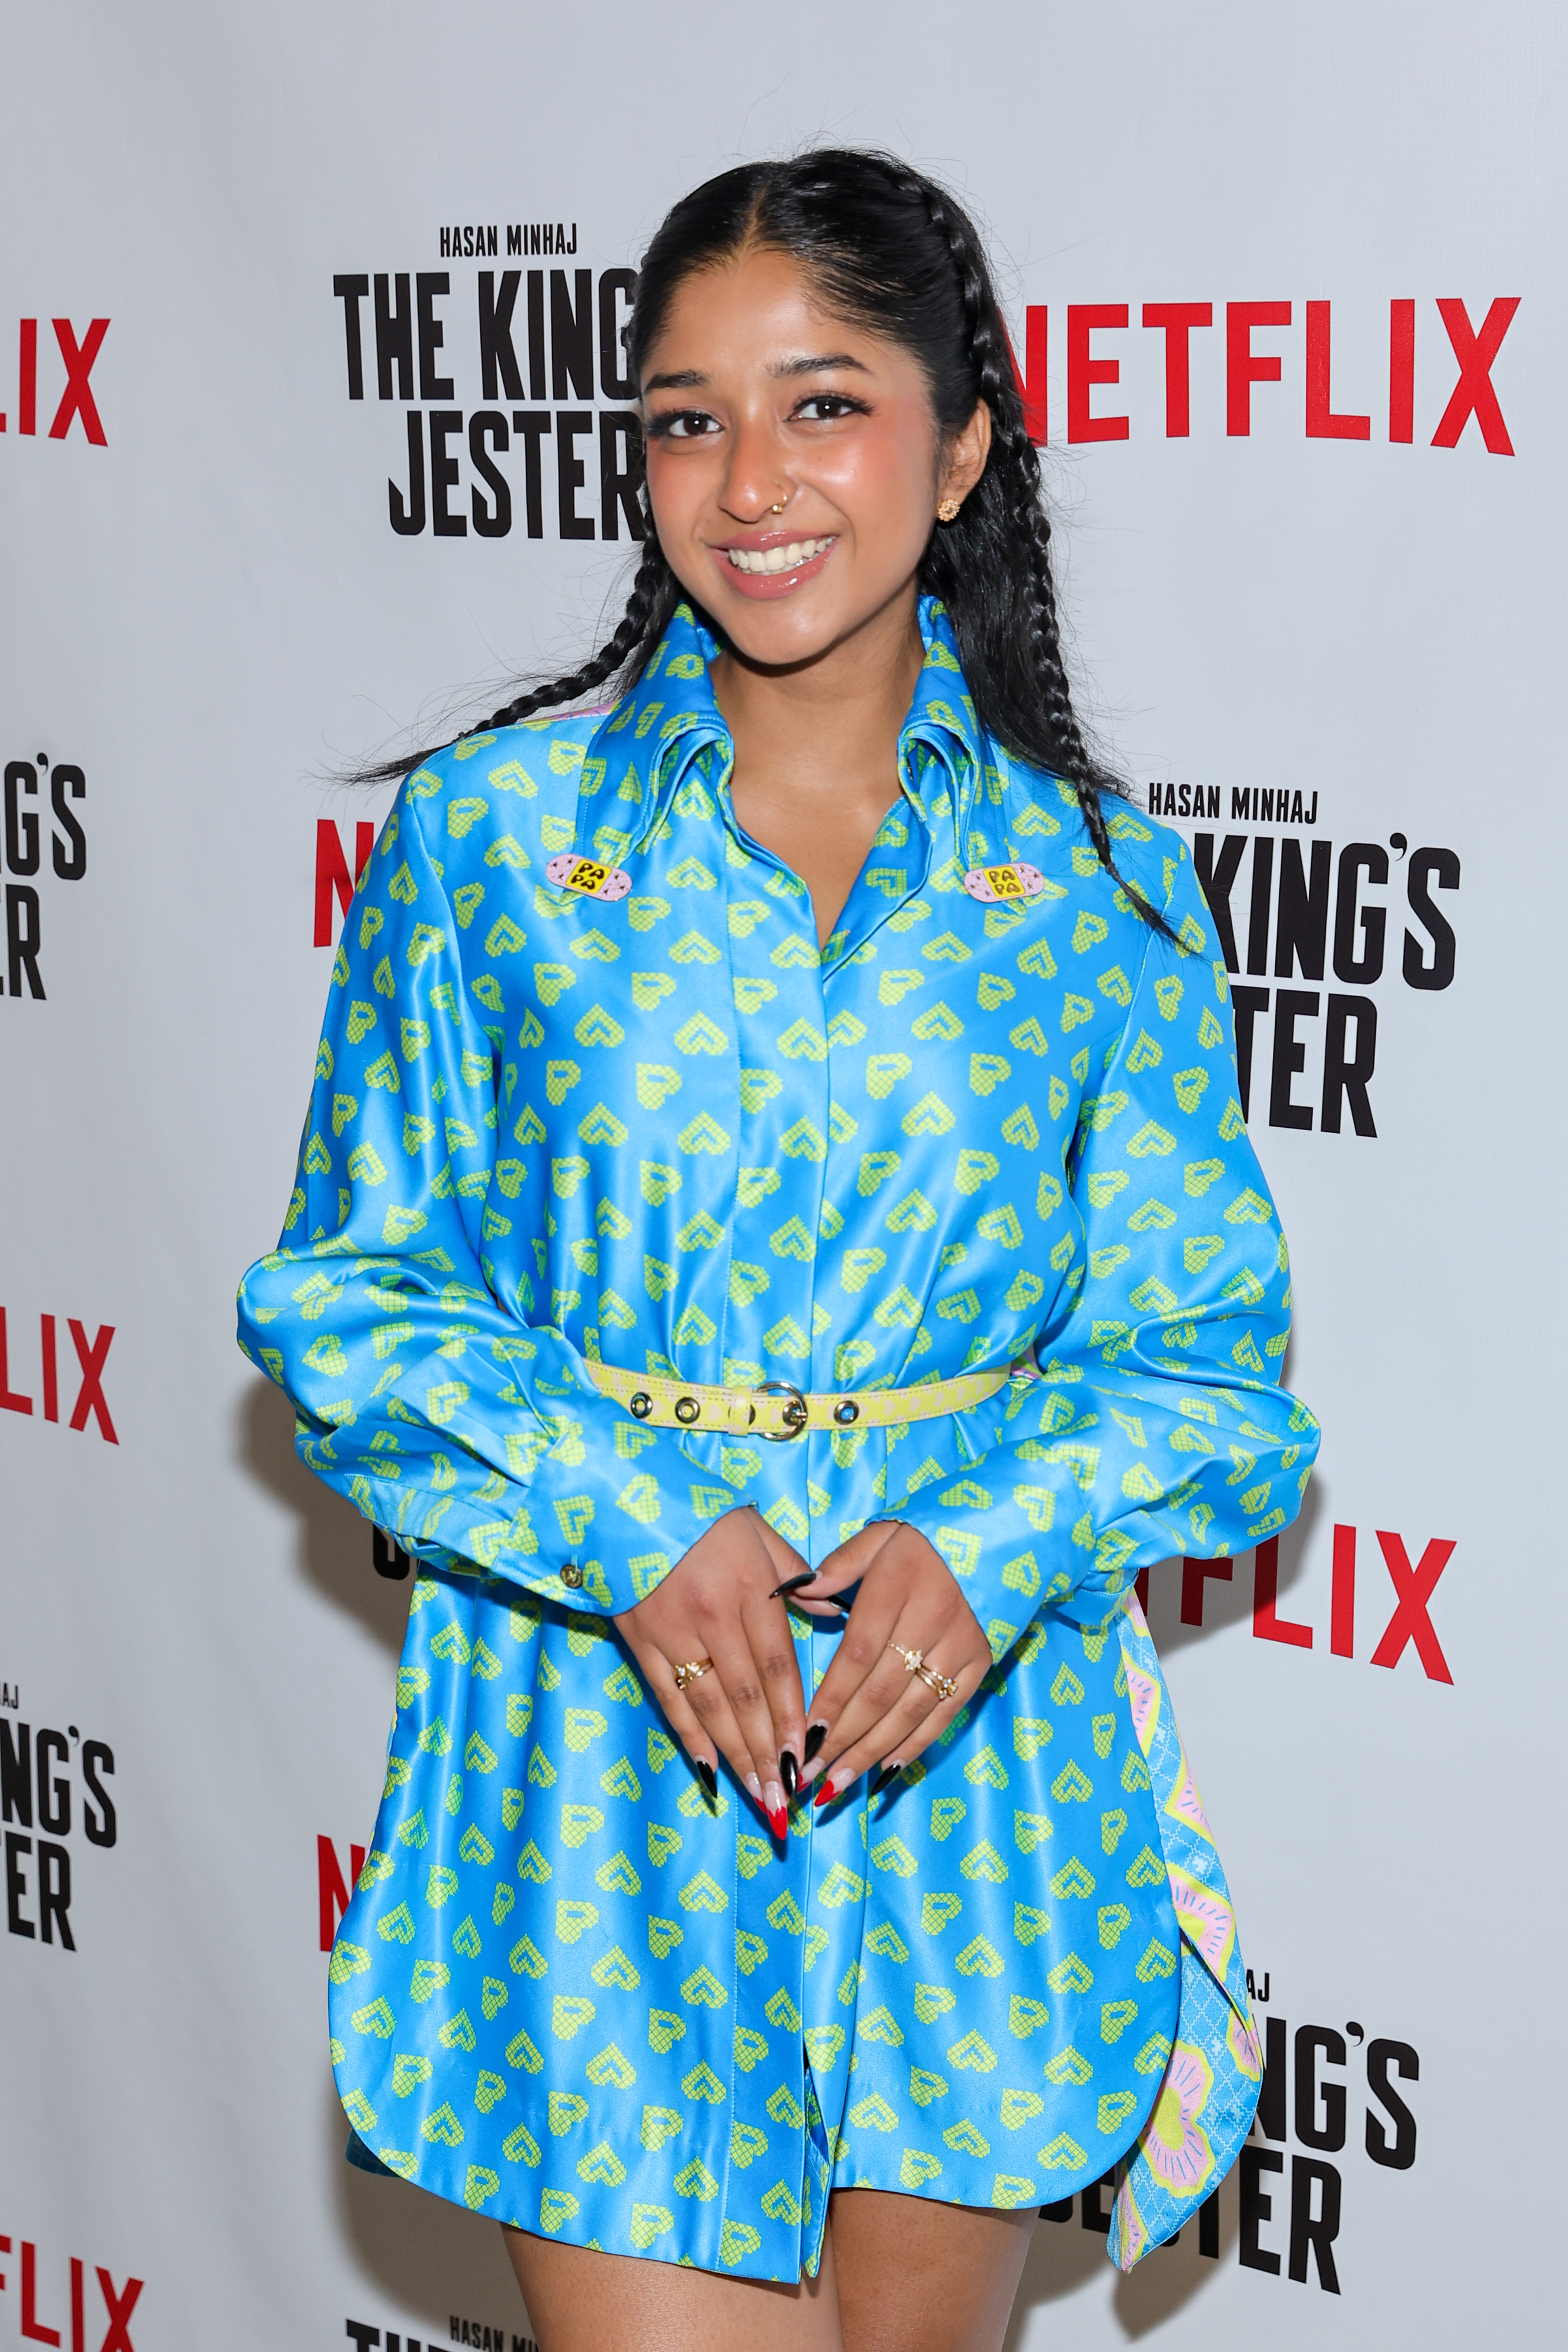 Maitreyi Ramakrishnan at the premiere party for "Hasan Minhaj: The King's Jester" on October 03, 2022, in Los Angeles, California. | Source: Getty Images